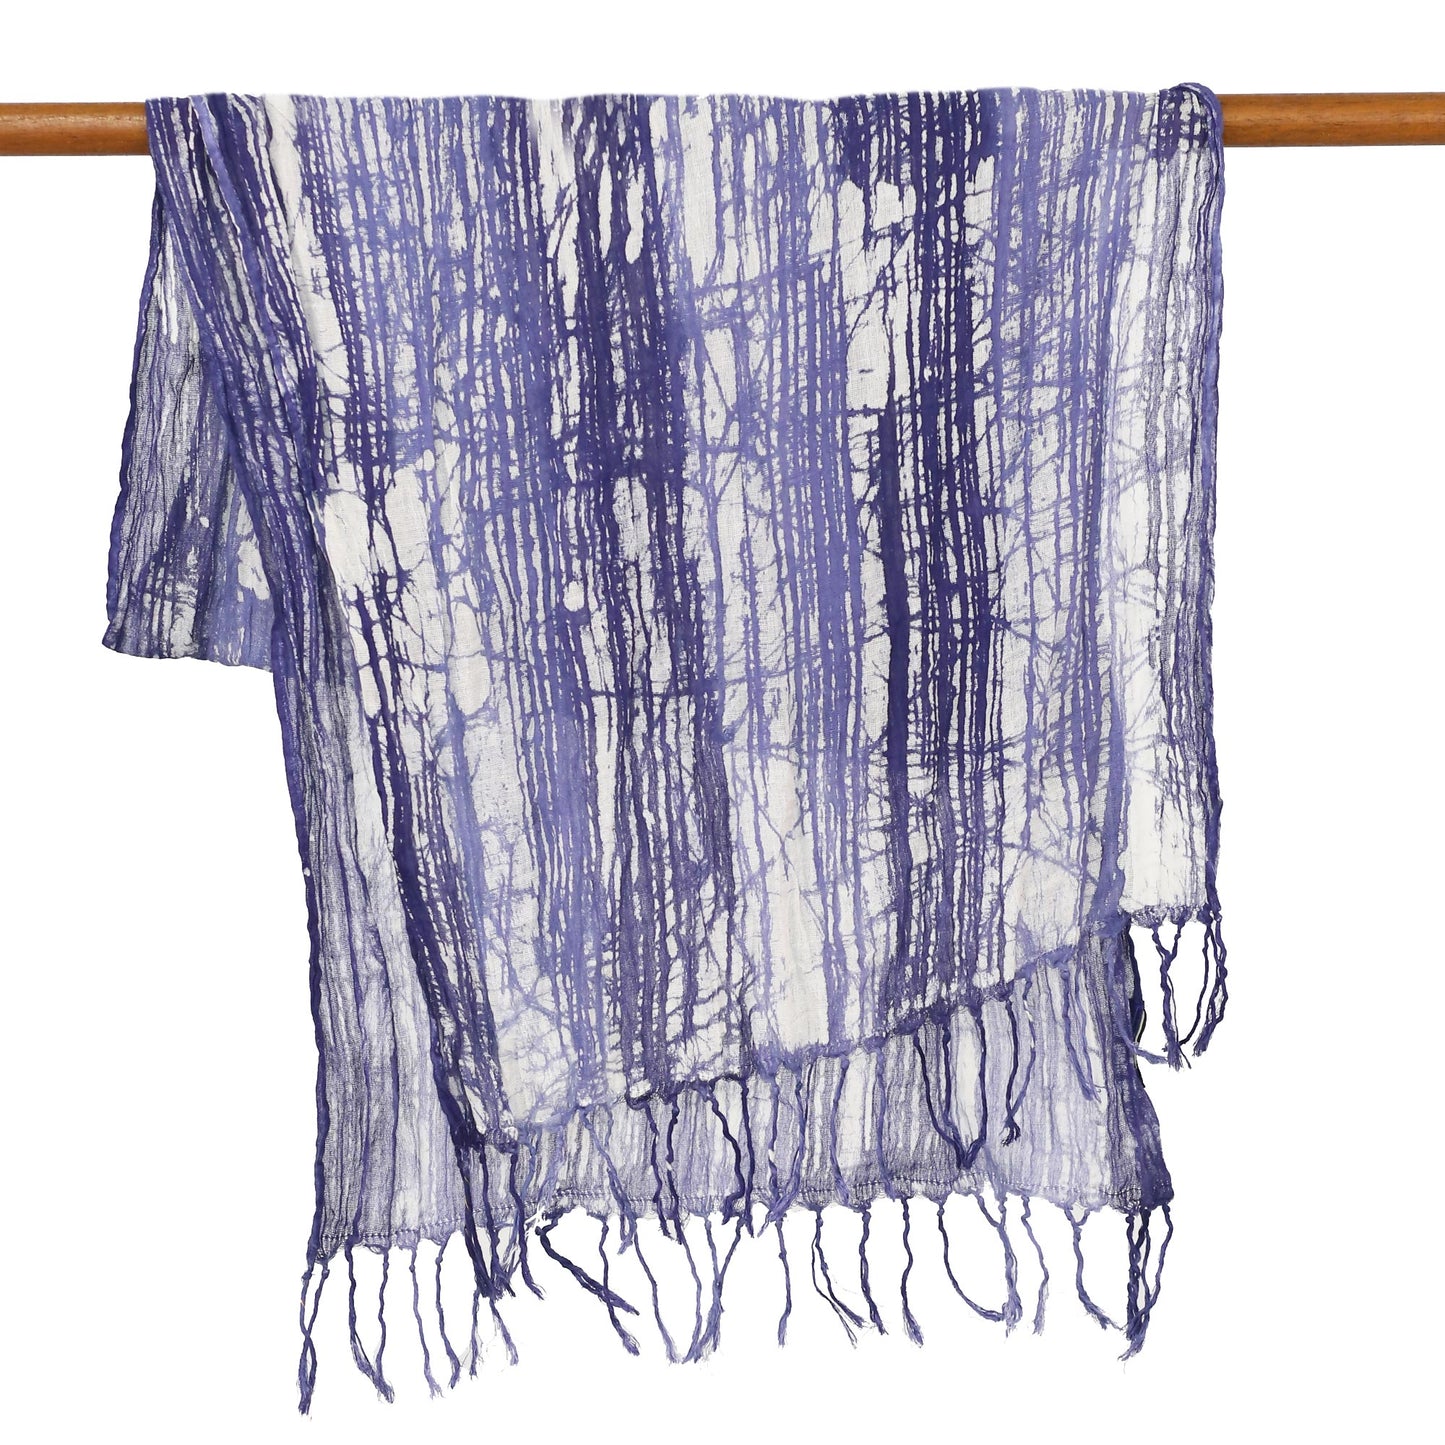 Speckled Field in Iris Batik Tie-Dyed Cotton Scarf in Blue-Violet from Thailand